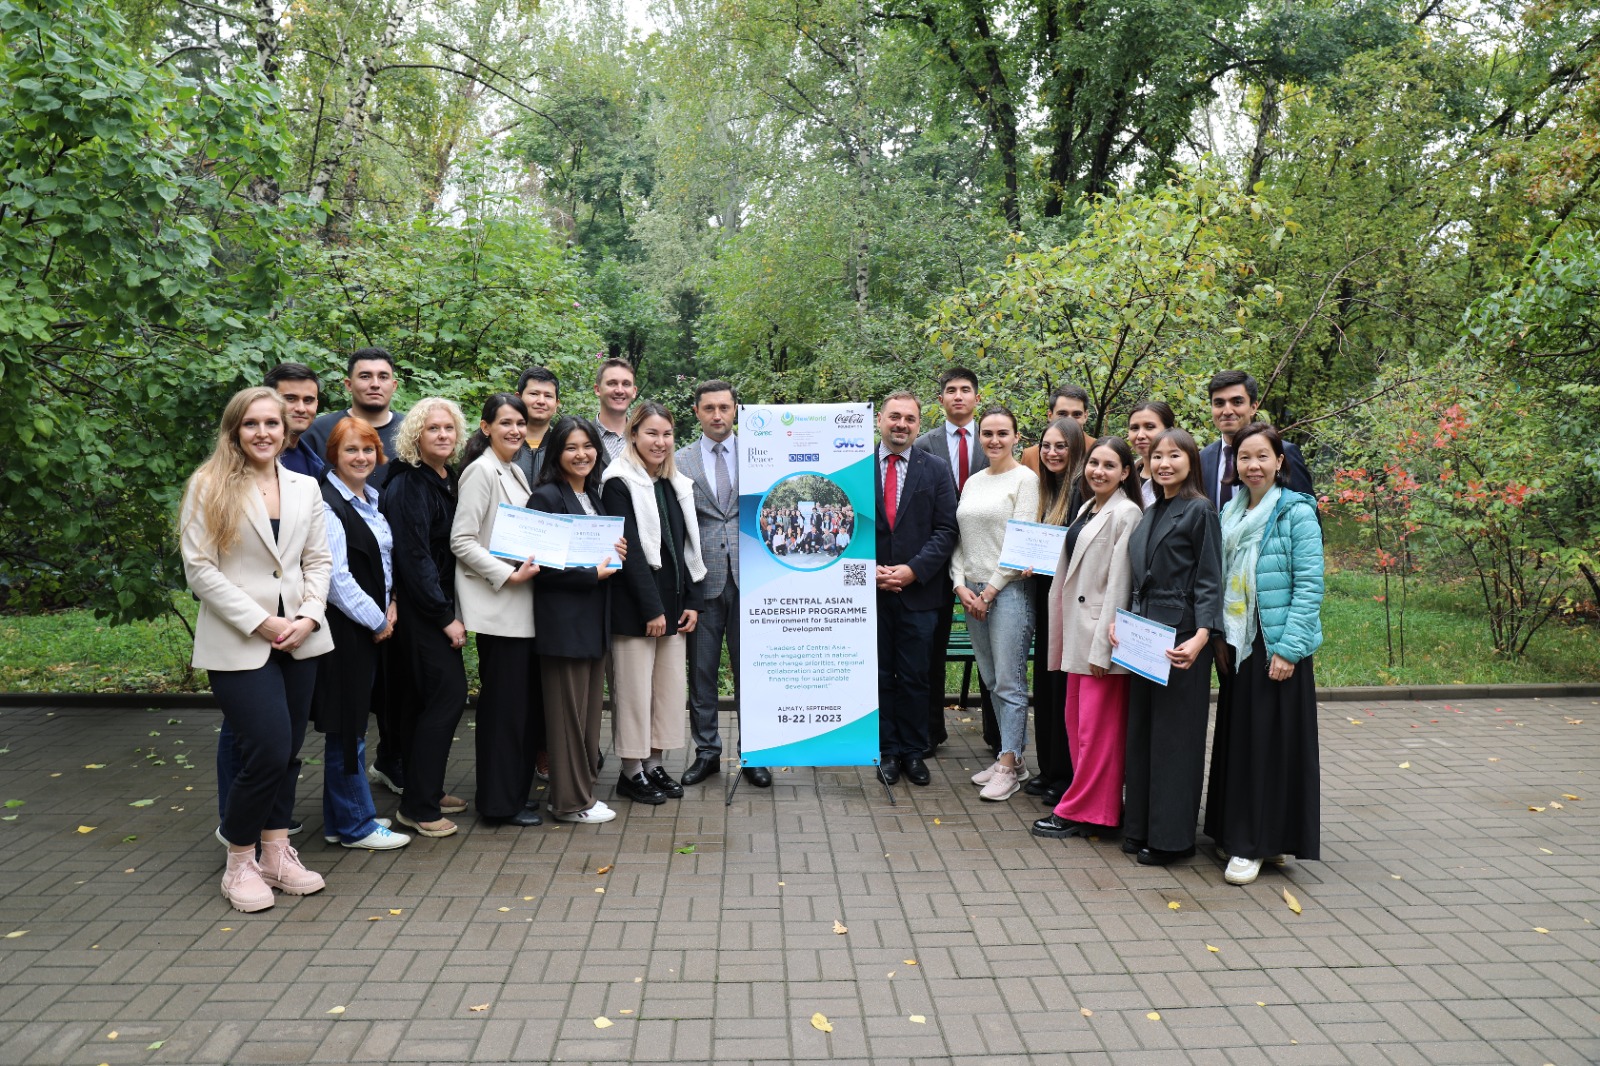 The 14th Central Asian Leadership Programme on Environment for Sustainable Development (CALP) will be held in September